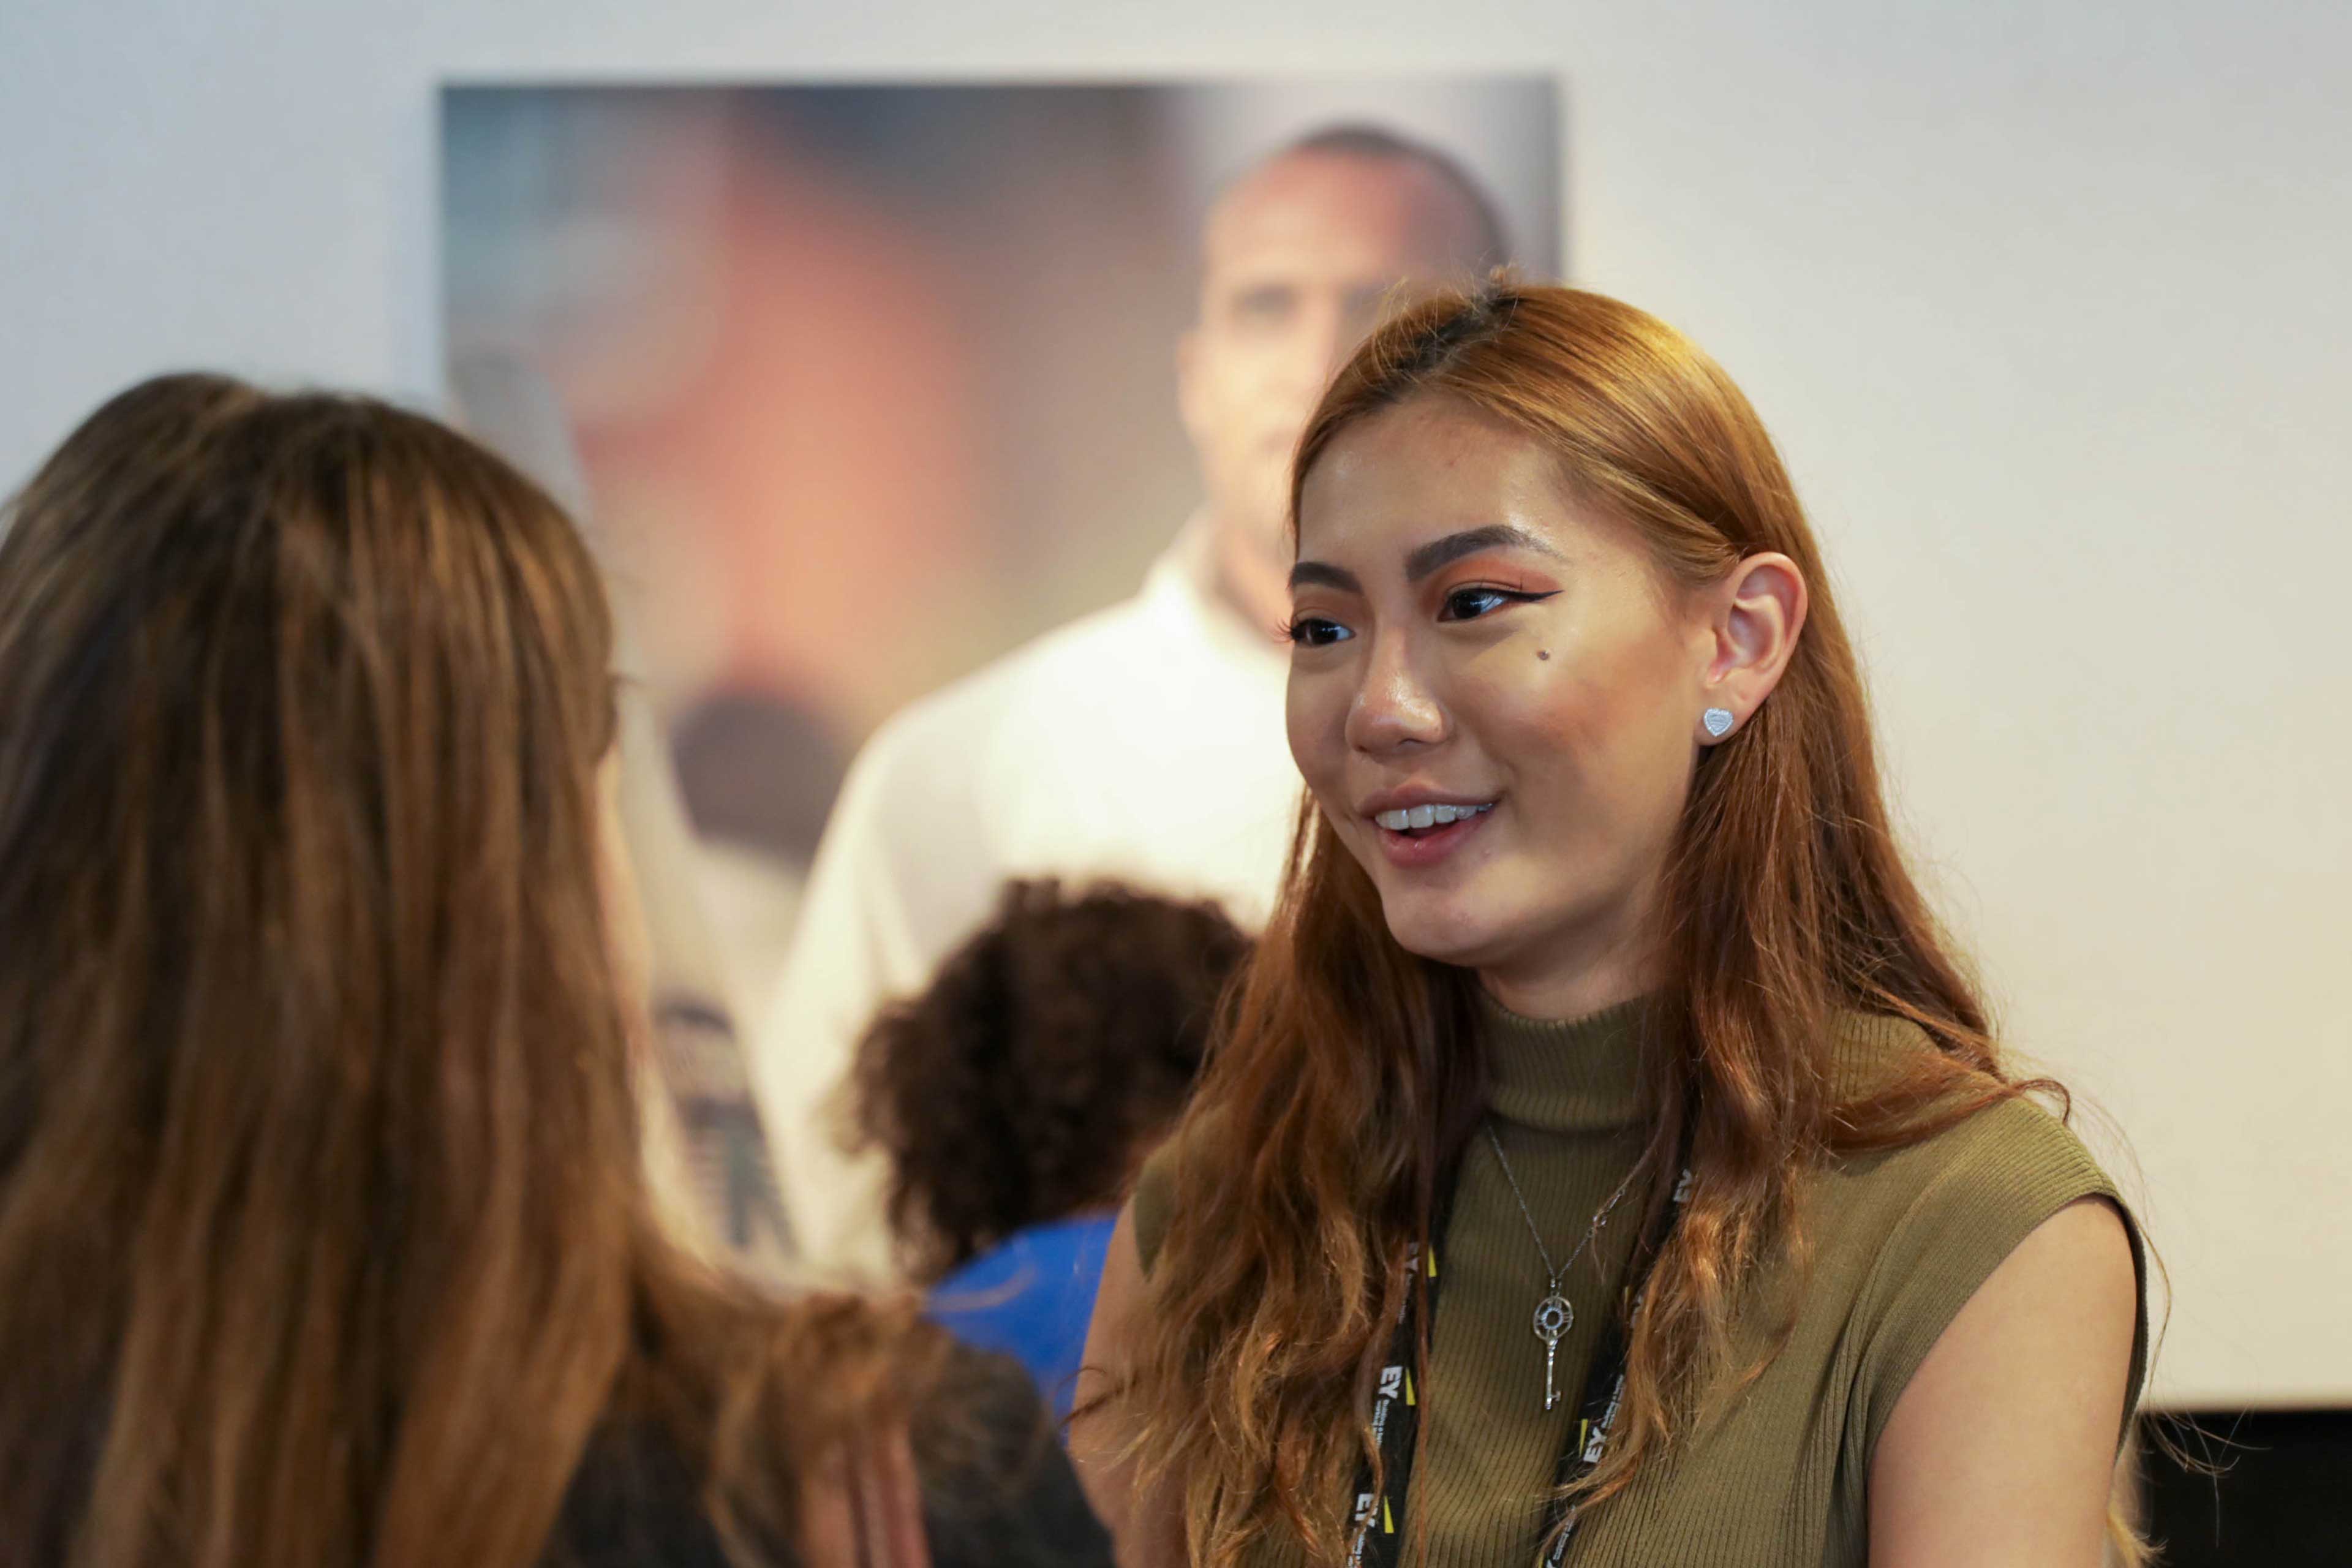 Student at an EY event